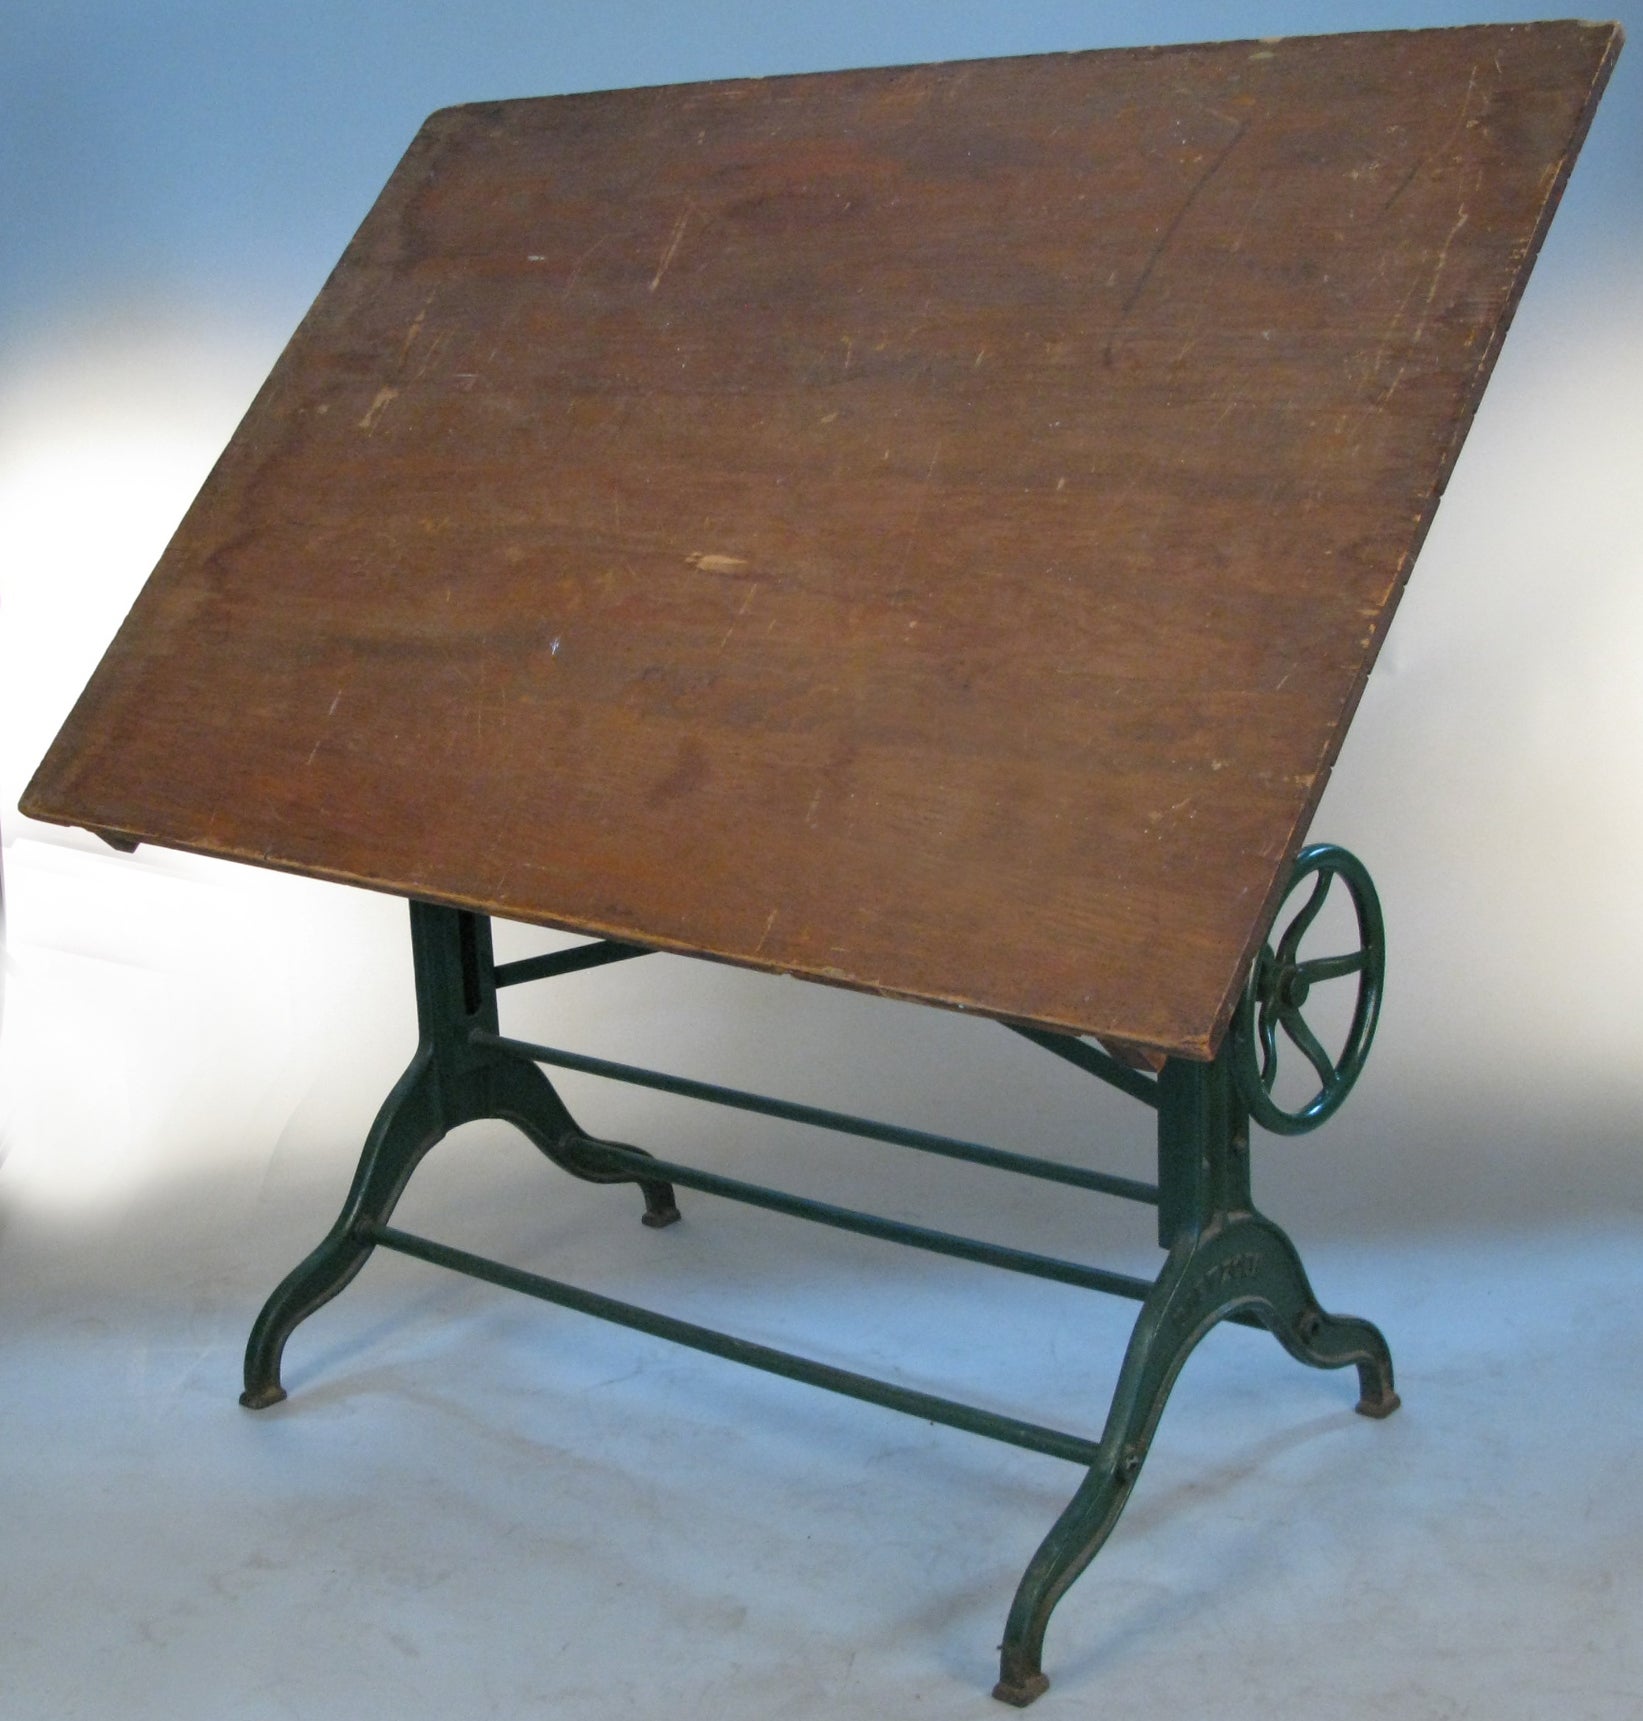 Antique Industrial Cast Iron Adjustable Drafting Table by Dietzgen